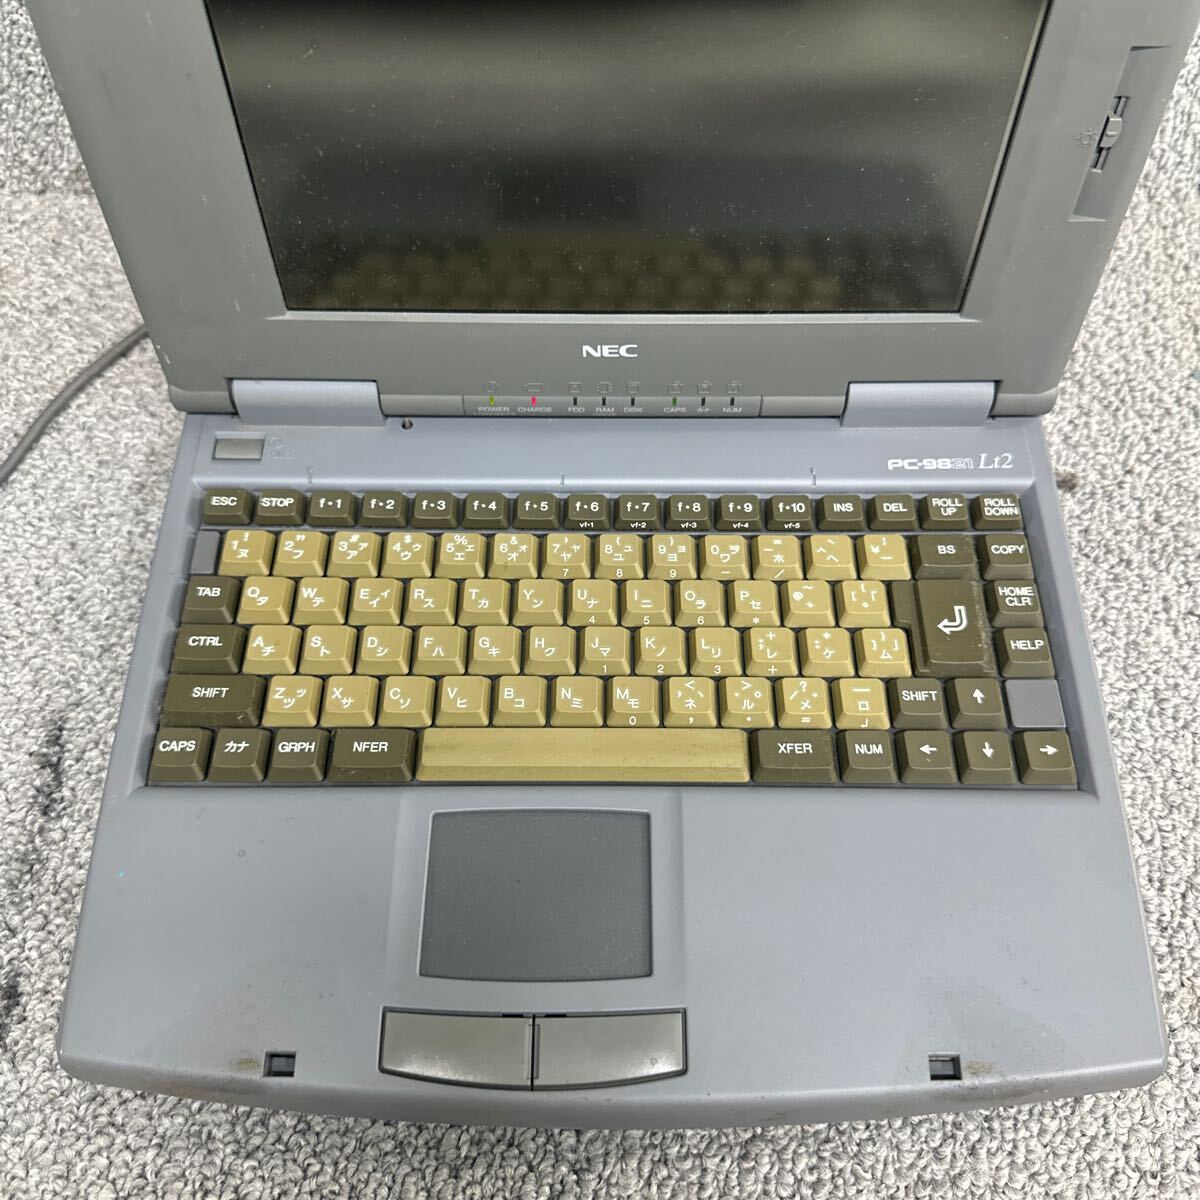 PCN98-1783 super-discount PC98 notebook NEC 98note LIGHT PC-9821Lt2/3D start-up has confirmed Junk including in a package possibility 